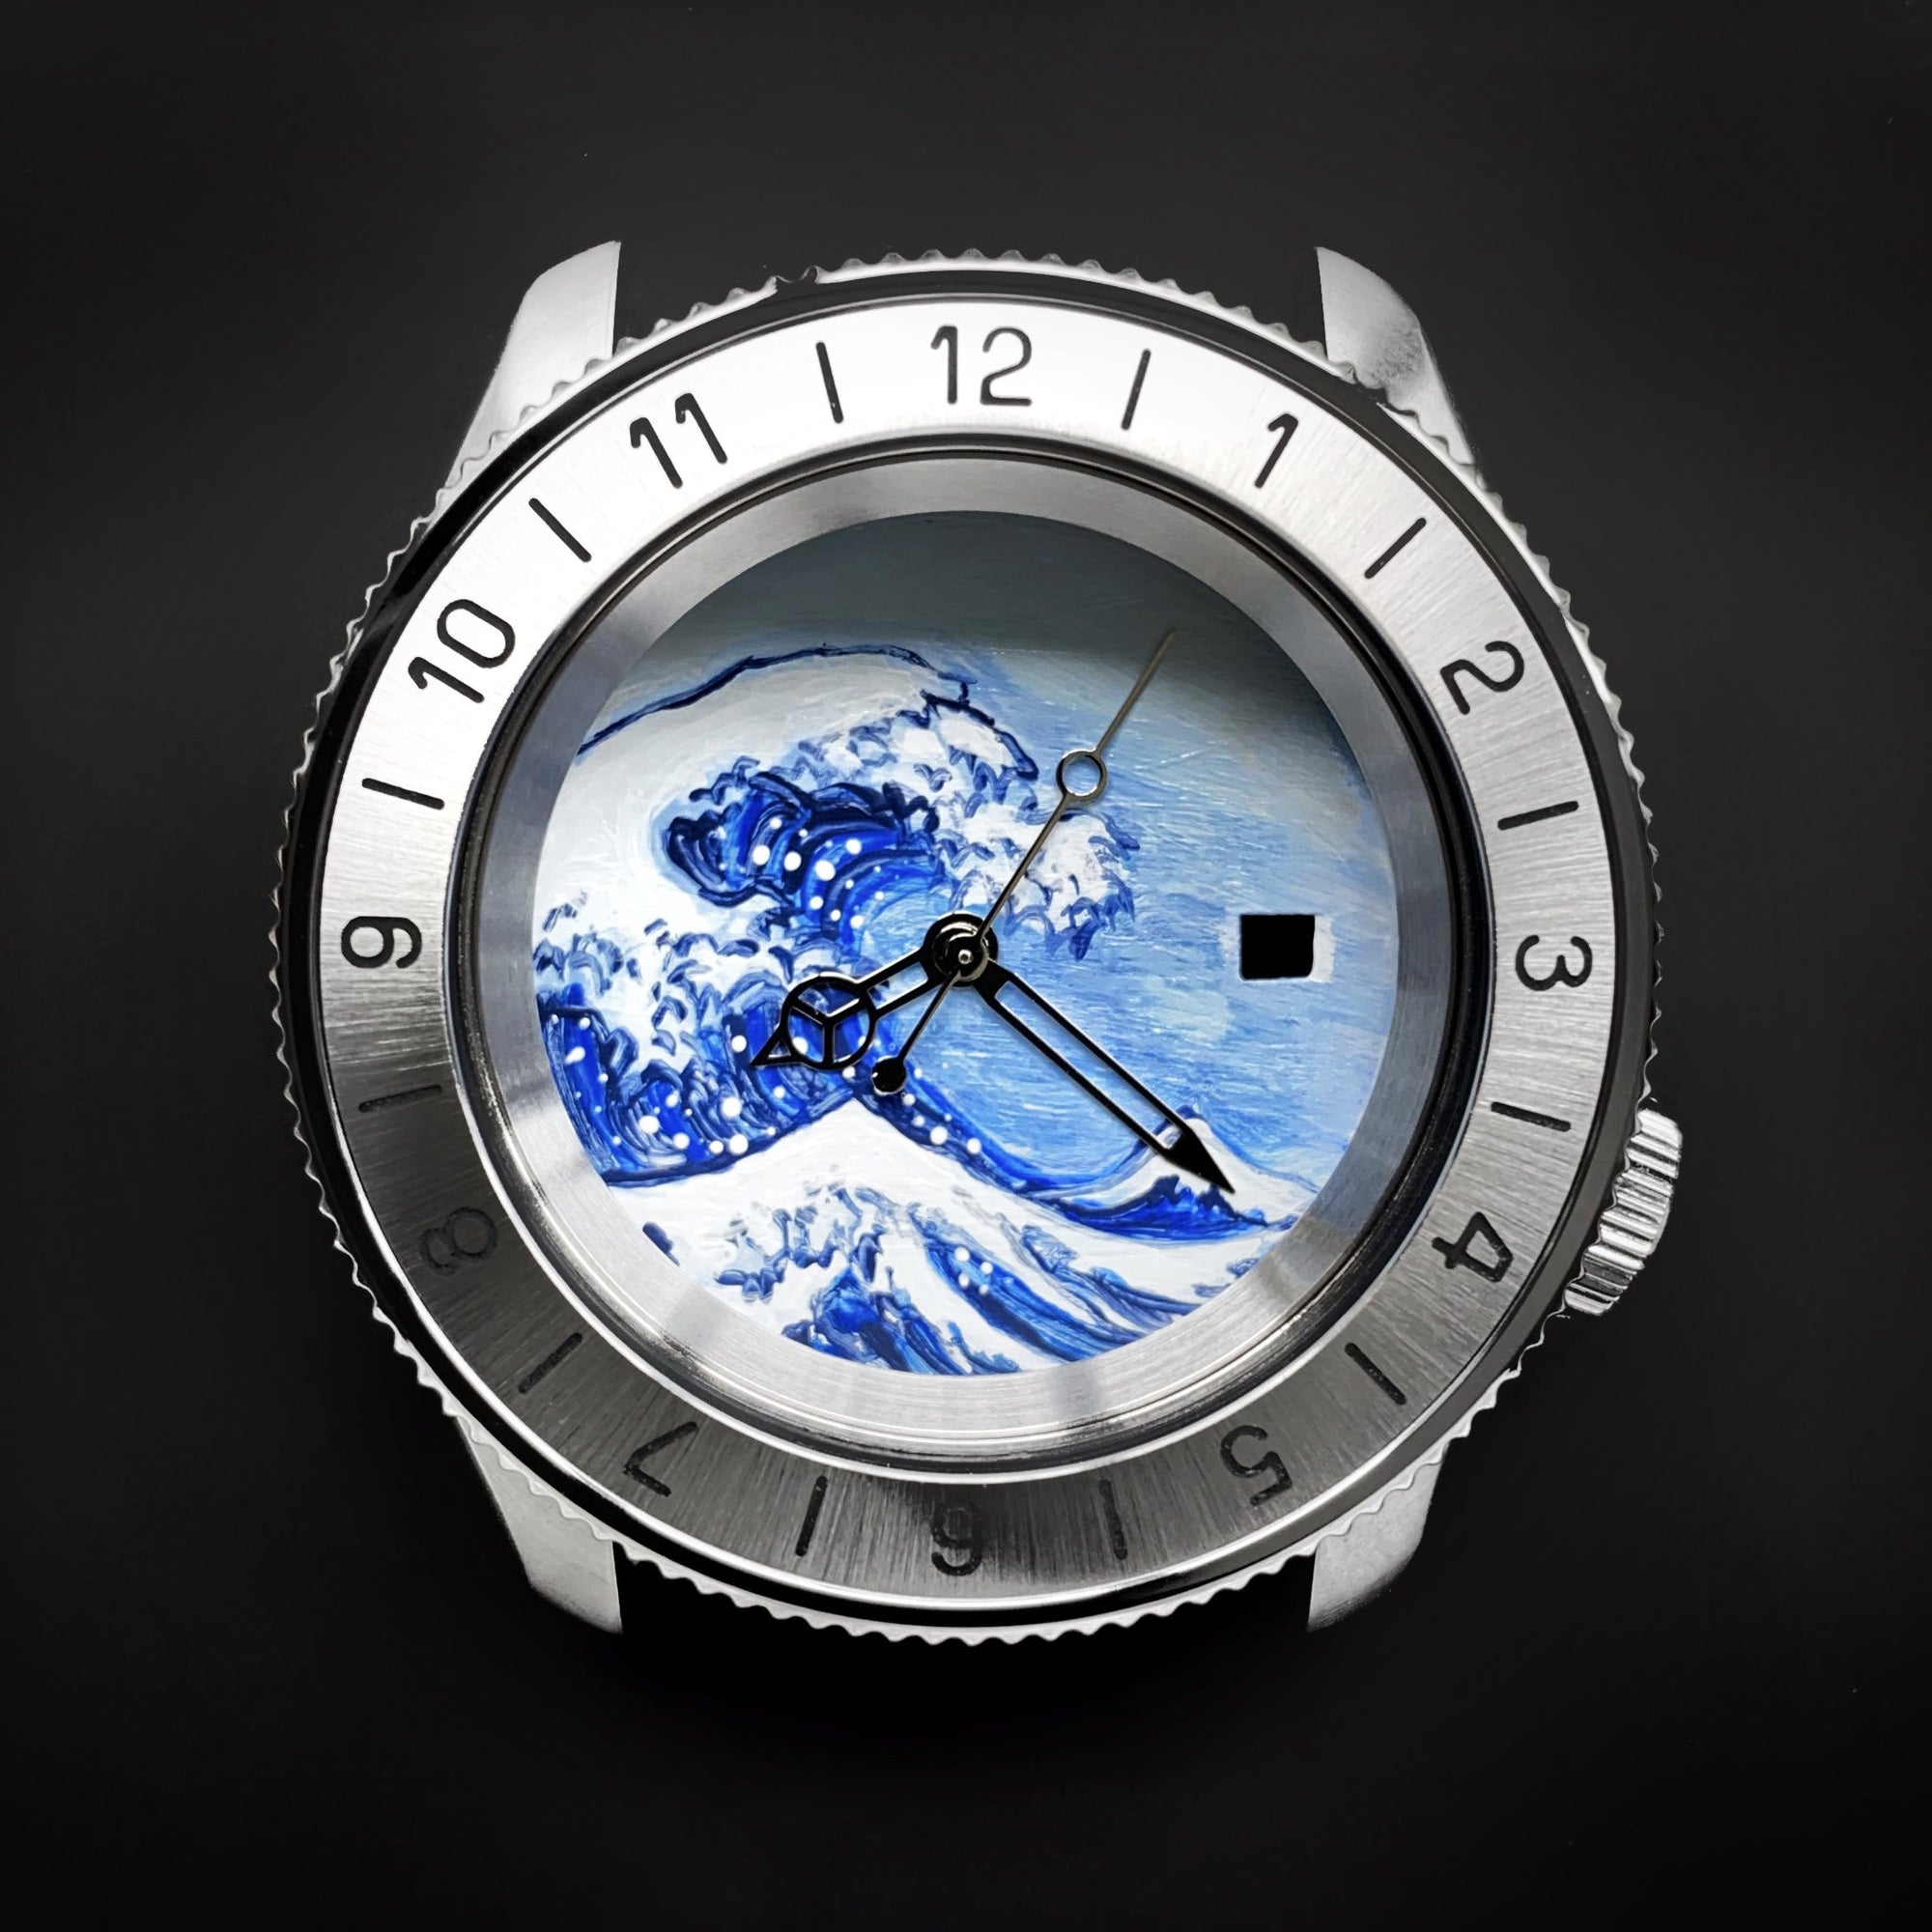 Dial - Handcrafted Series - The Great Wave